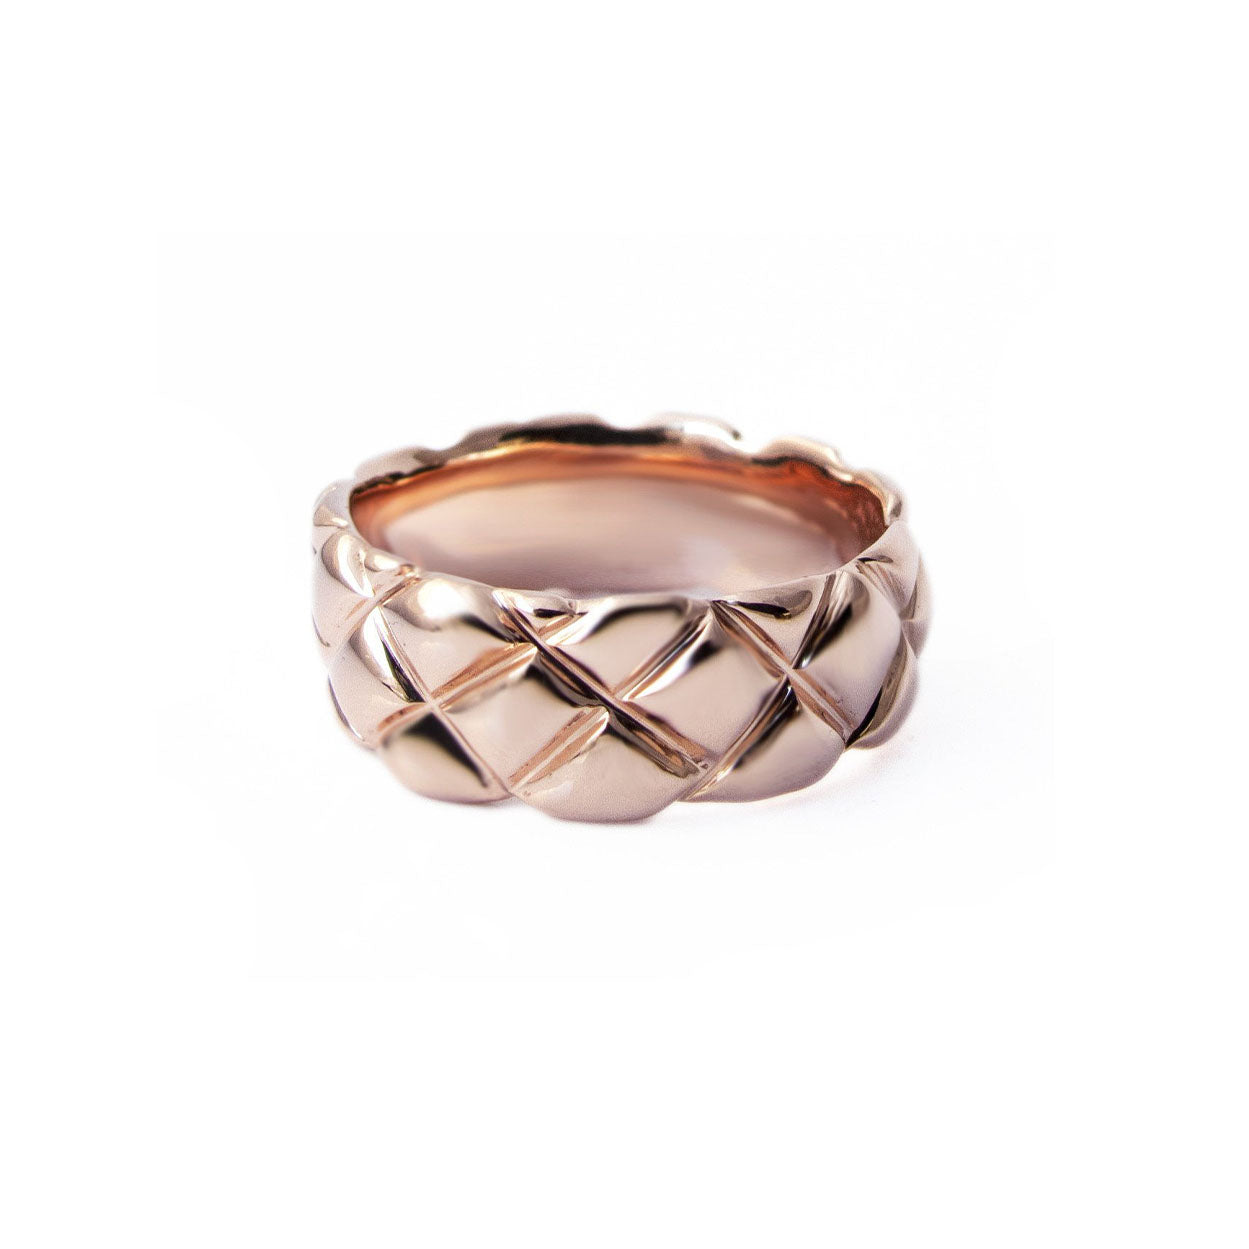 7mm quilted band crafted in 14KT rose gold. 